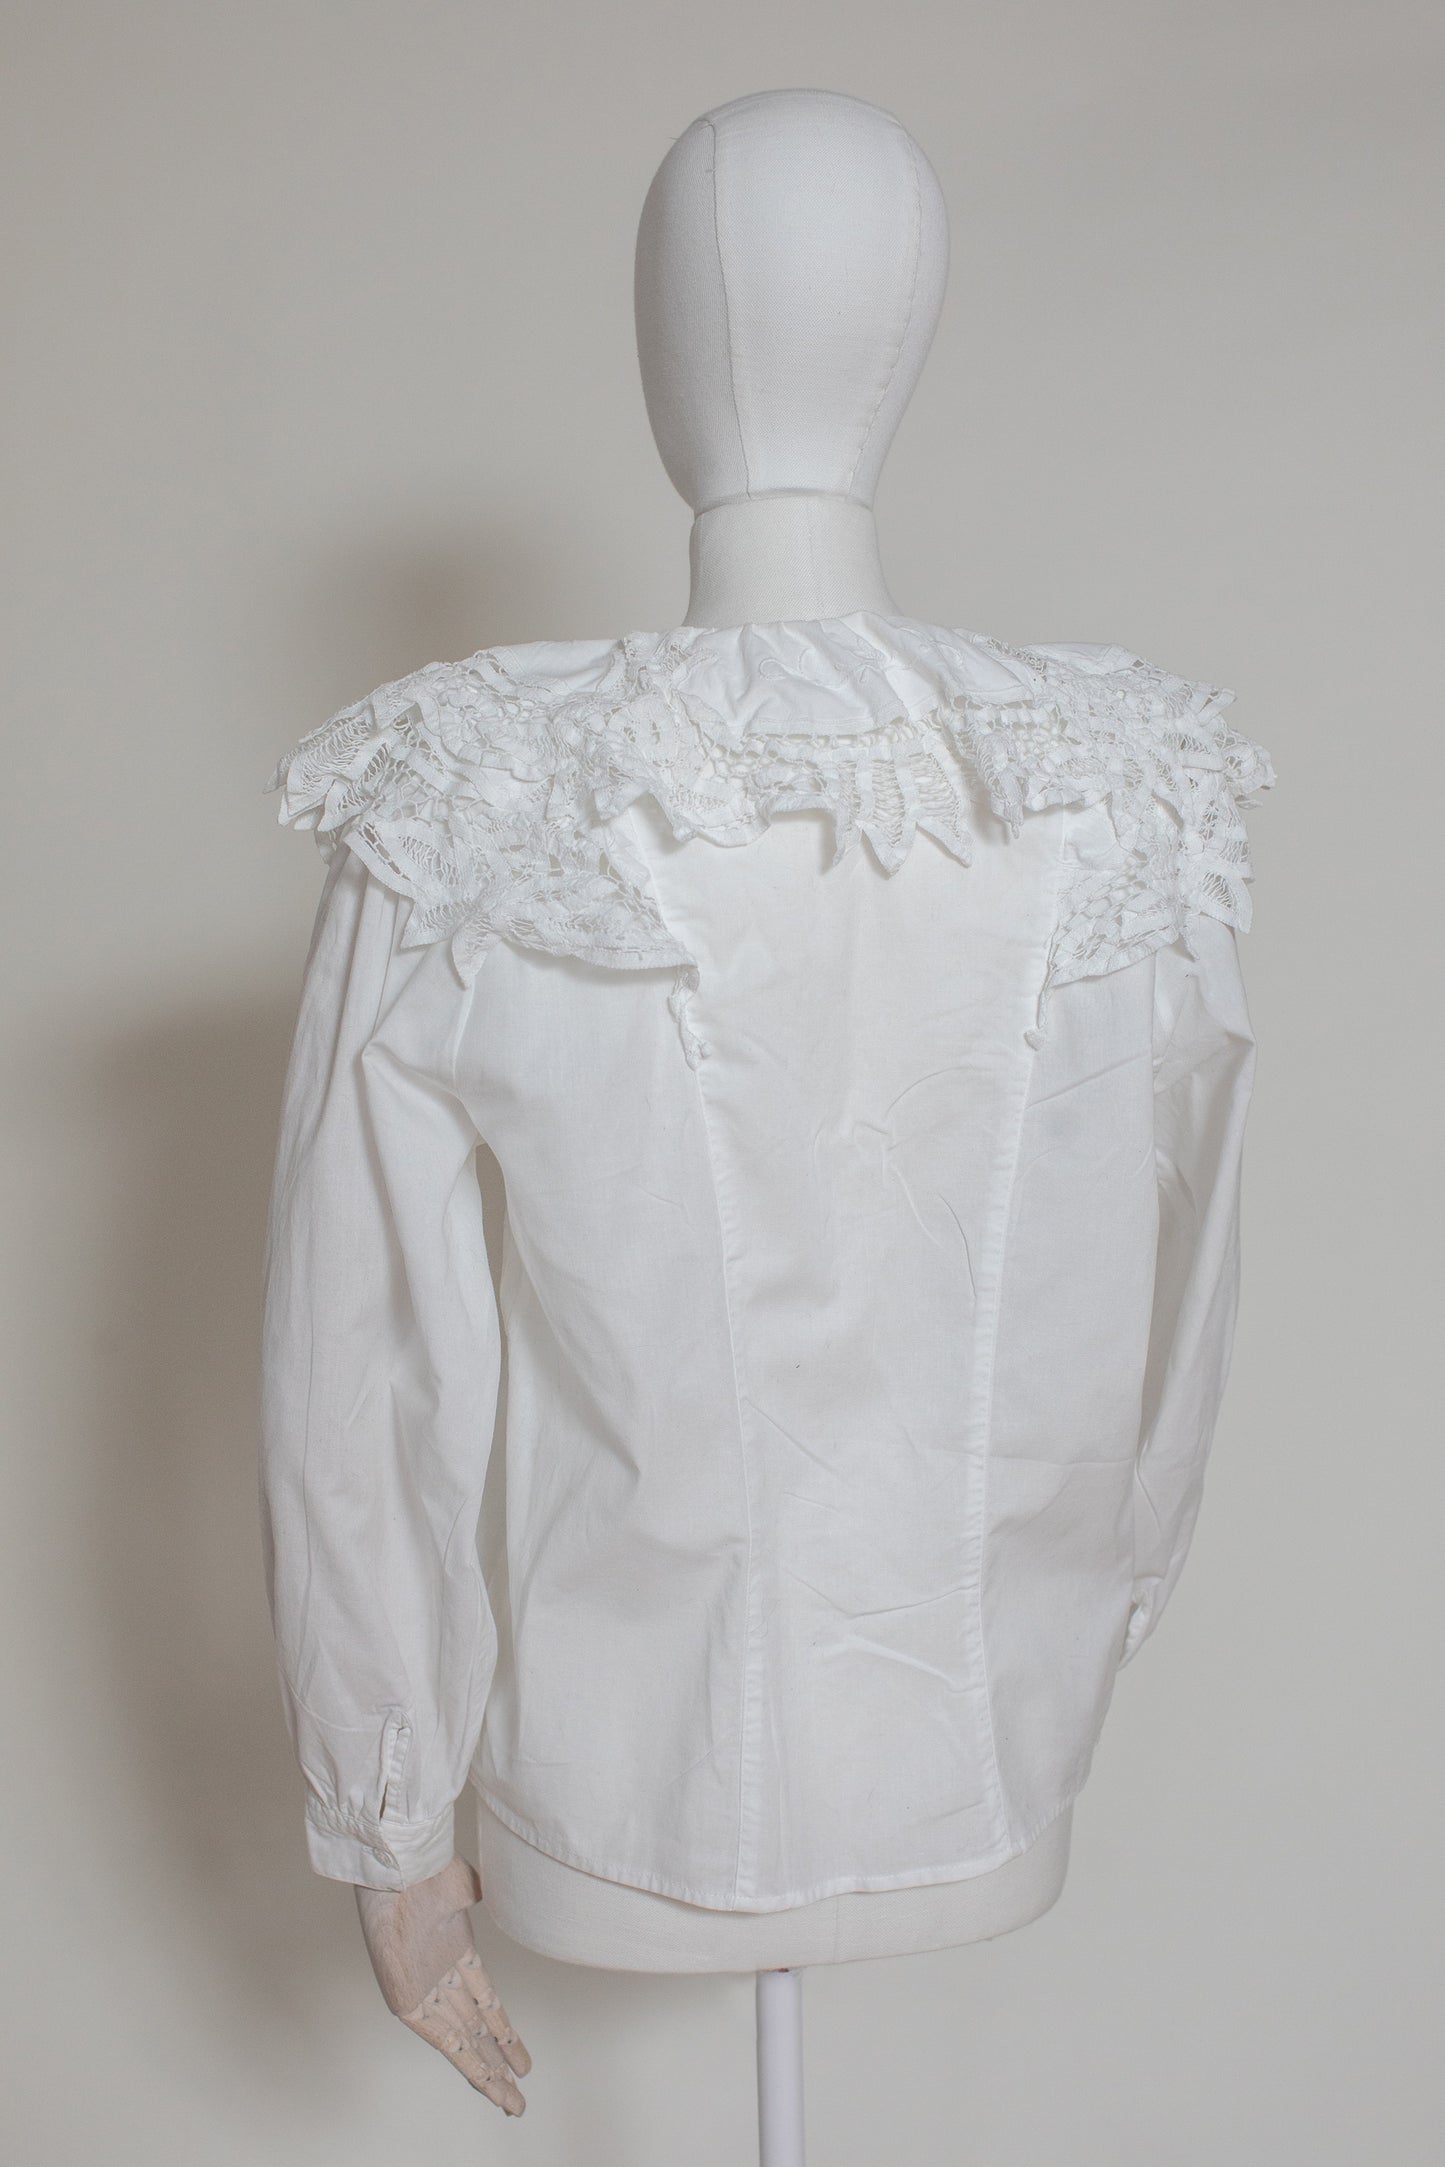 1980s Vintage White Cotton Blouse with Large Lace Collar Size S-M